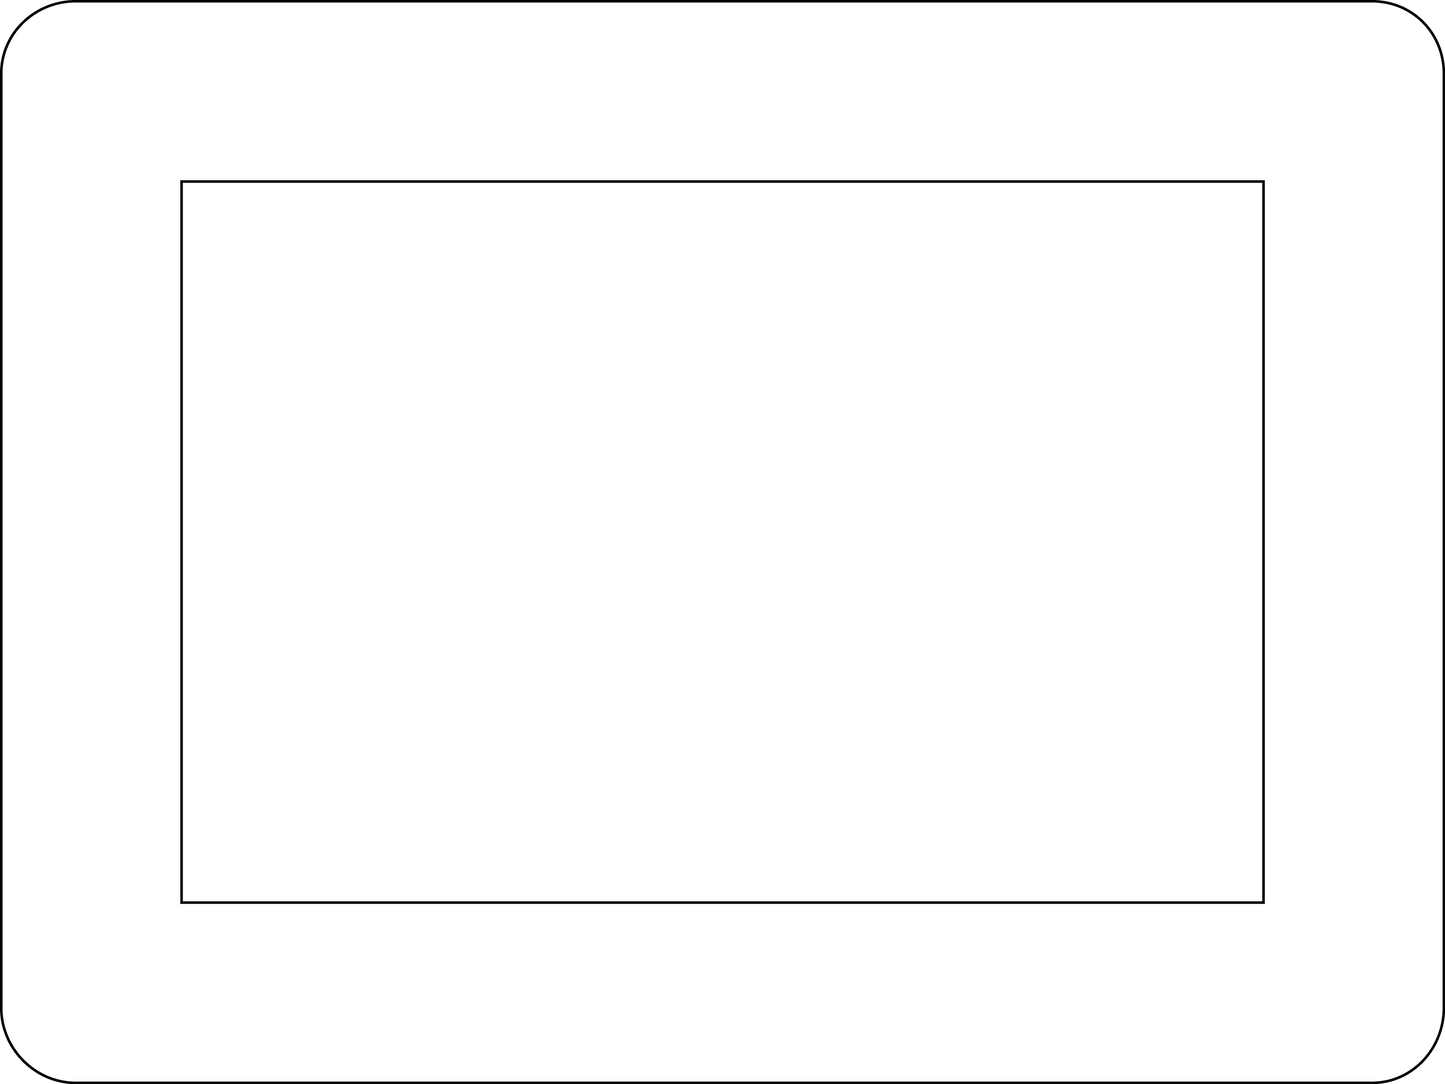 4 x 6 Classic Dry Erase Adhesive Frames for Smooth Surfaces - Pack of 10